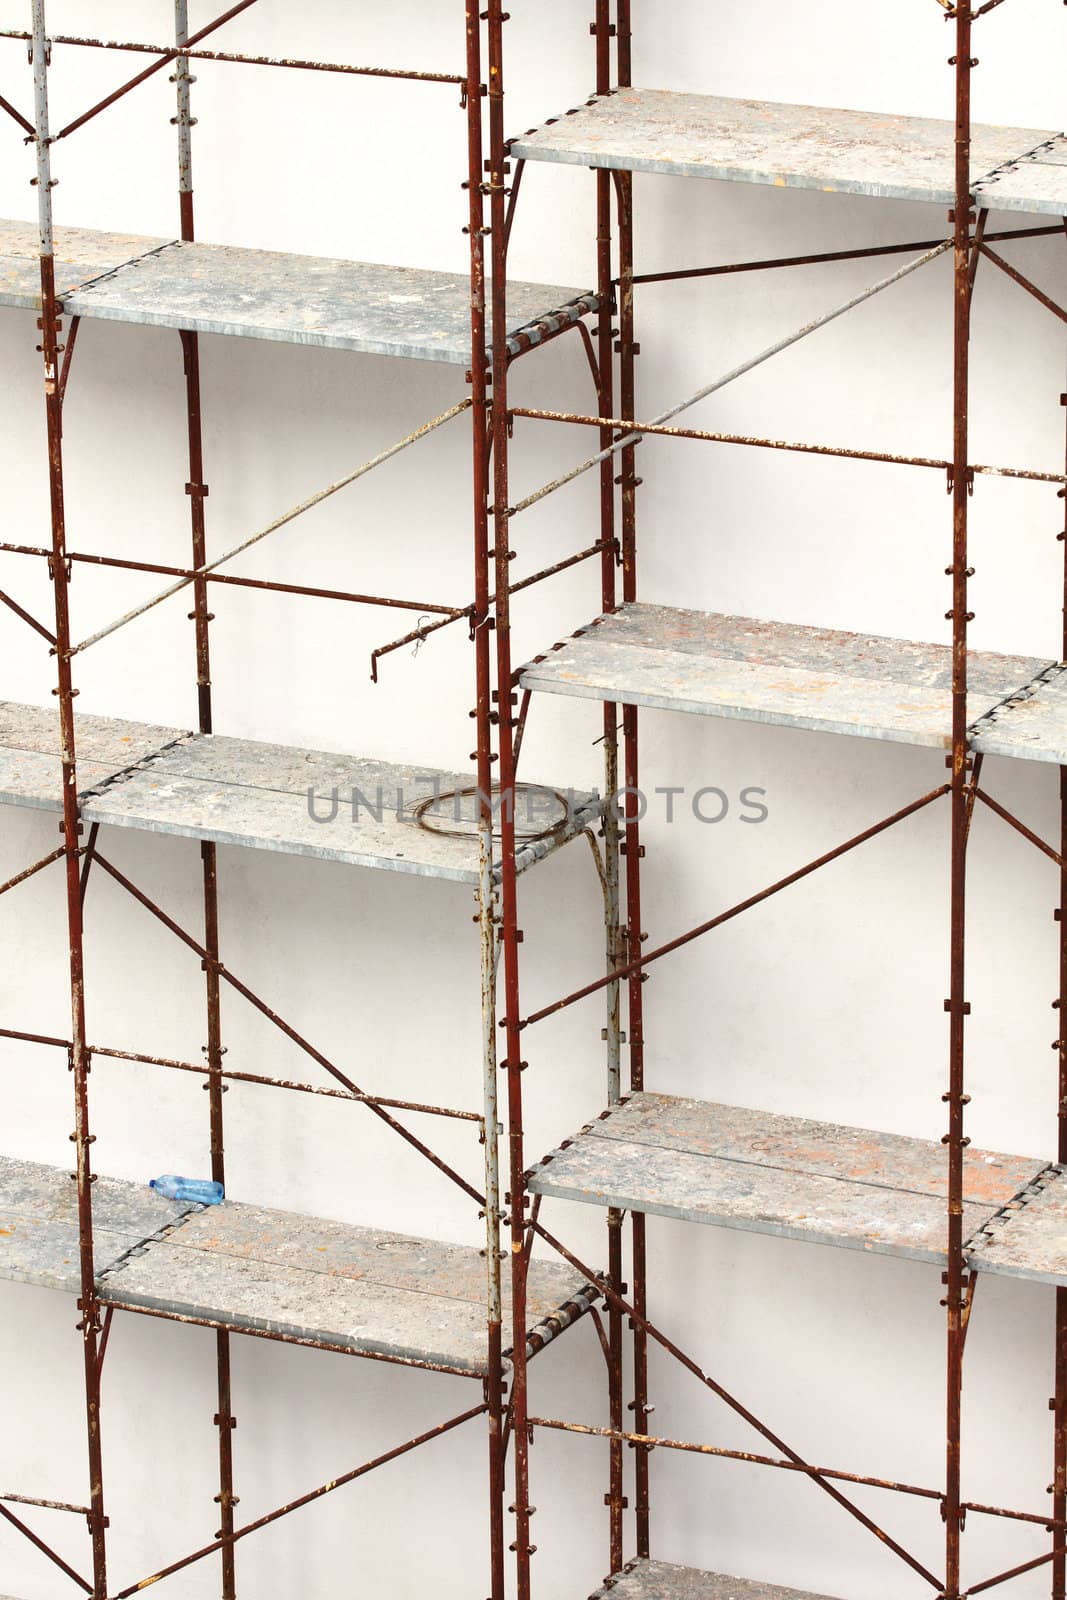 Rusty tubular scaffolding at a construction site 